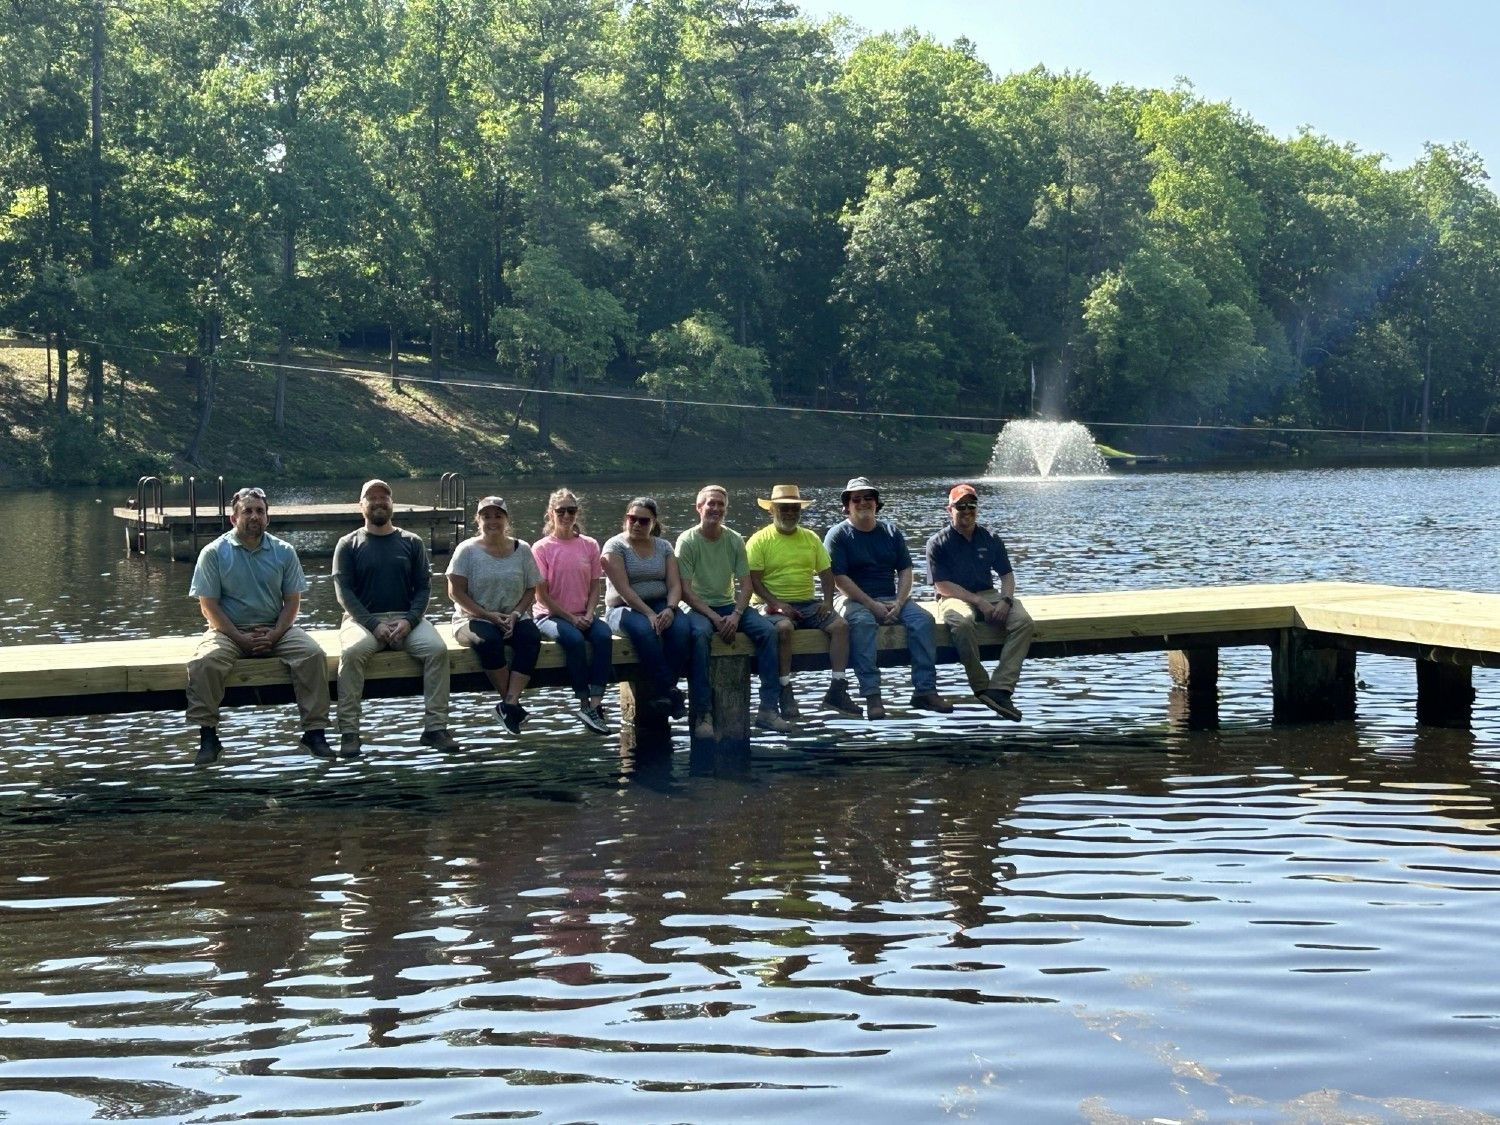 The Hourigan team donated a day of hard work to YMCA Camp Thunderbird by replacing an old, unsafe fishing dock.